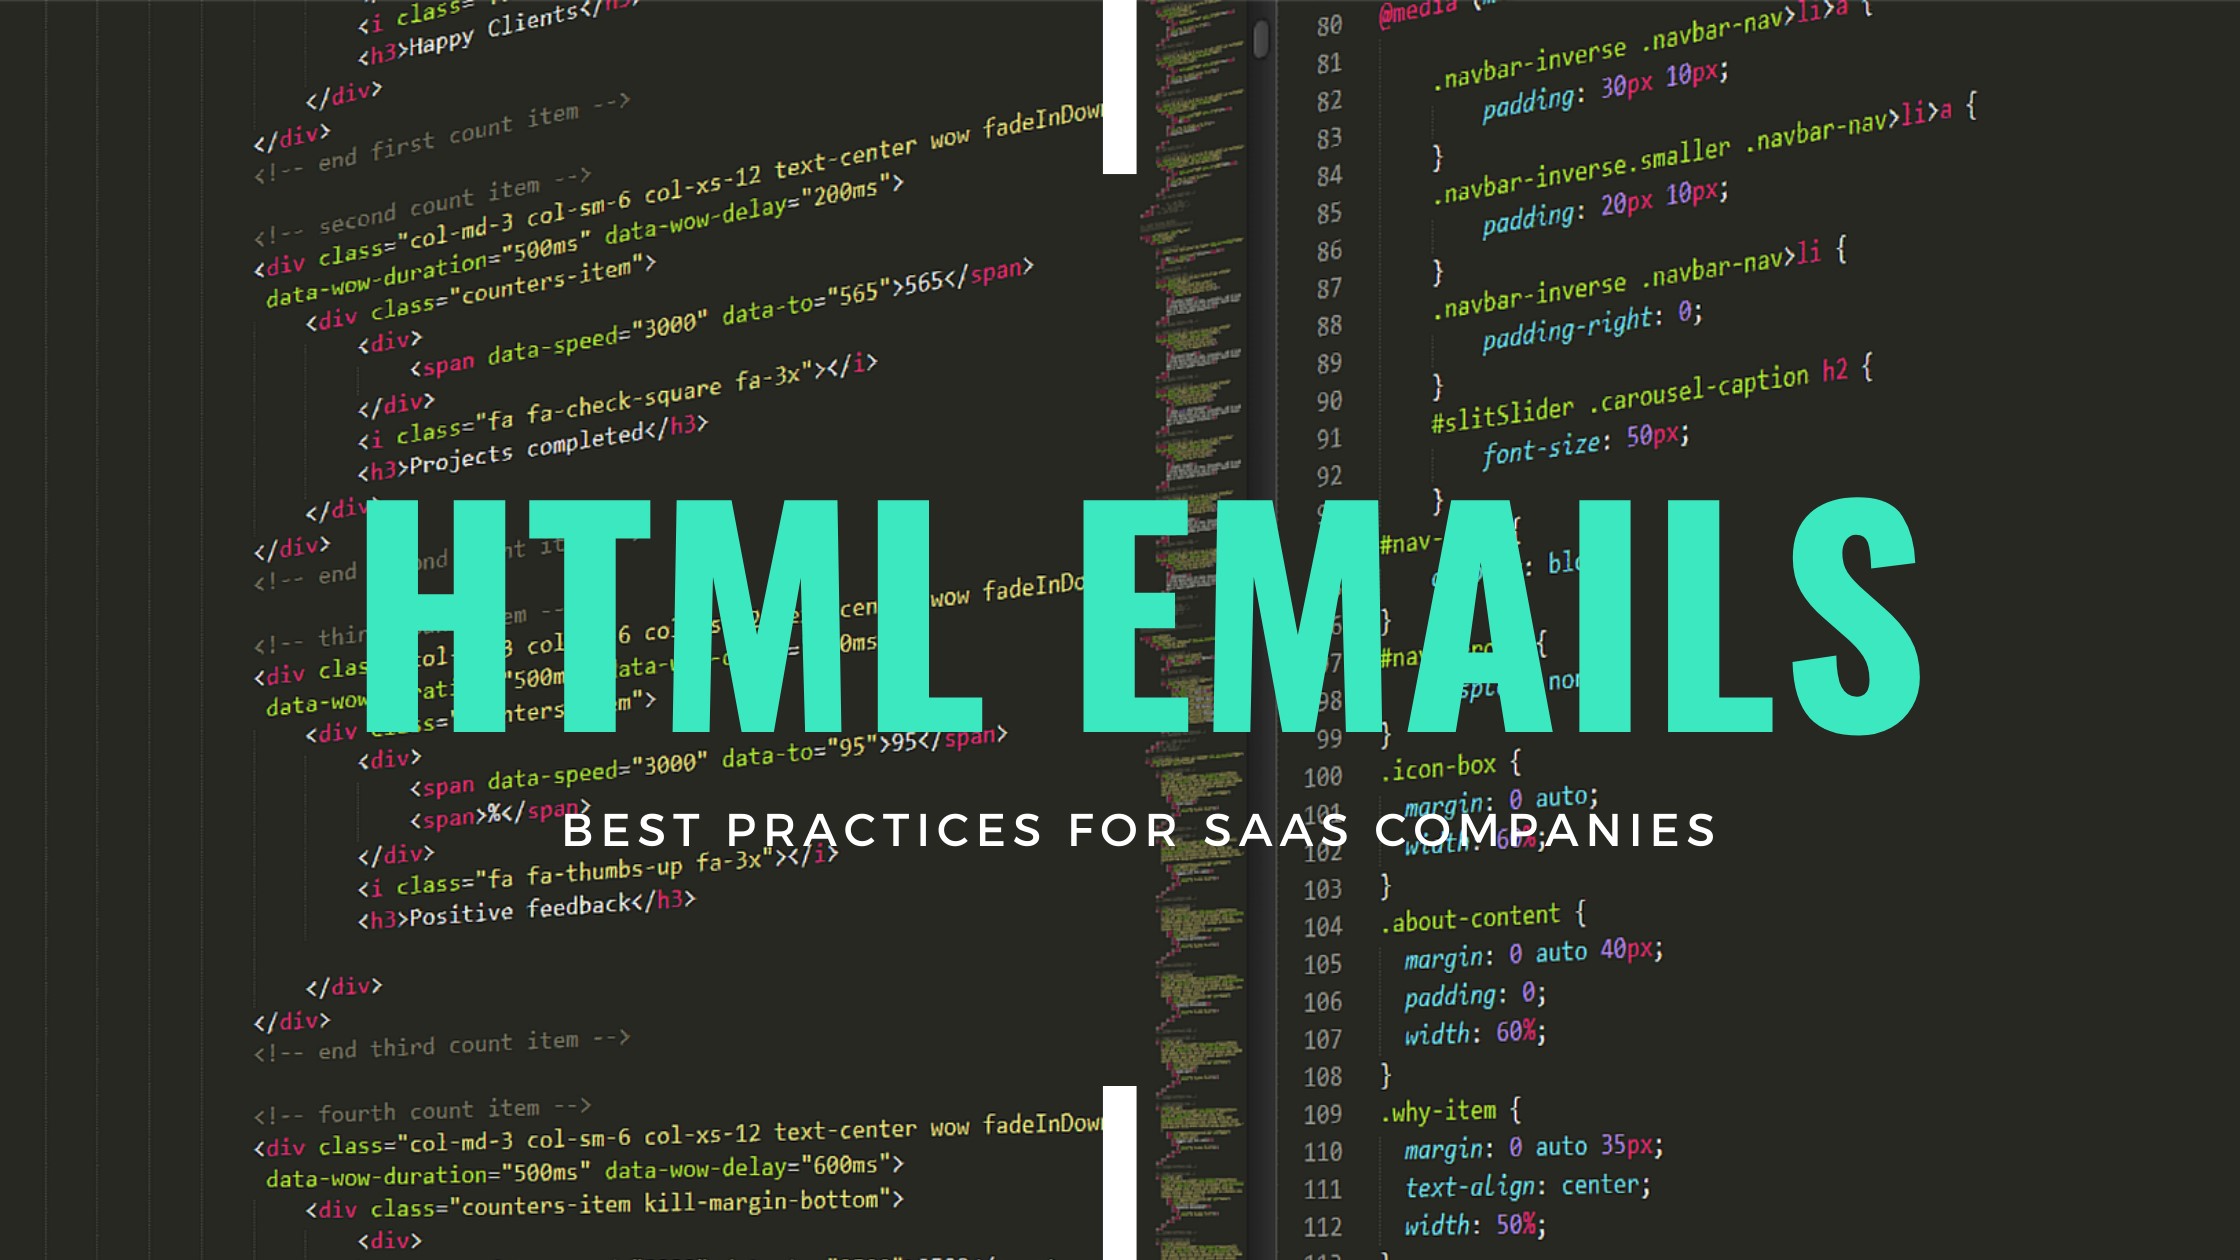 A Step-By-Step Guide To Editing The HTML Source Of An Email